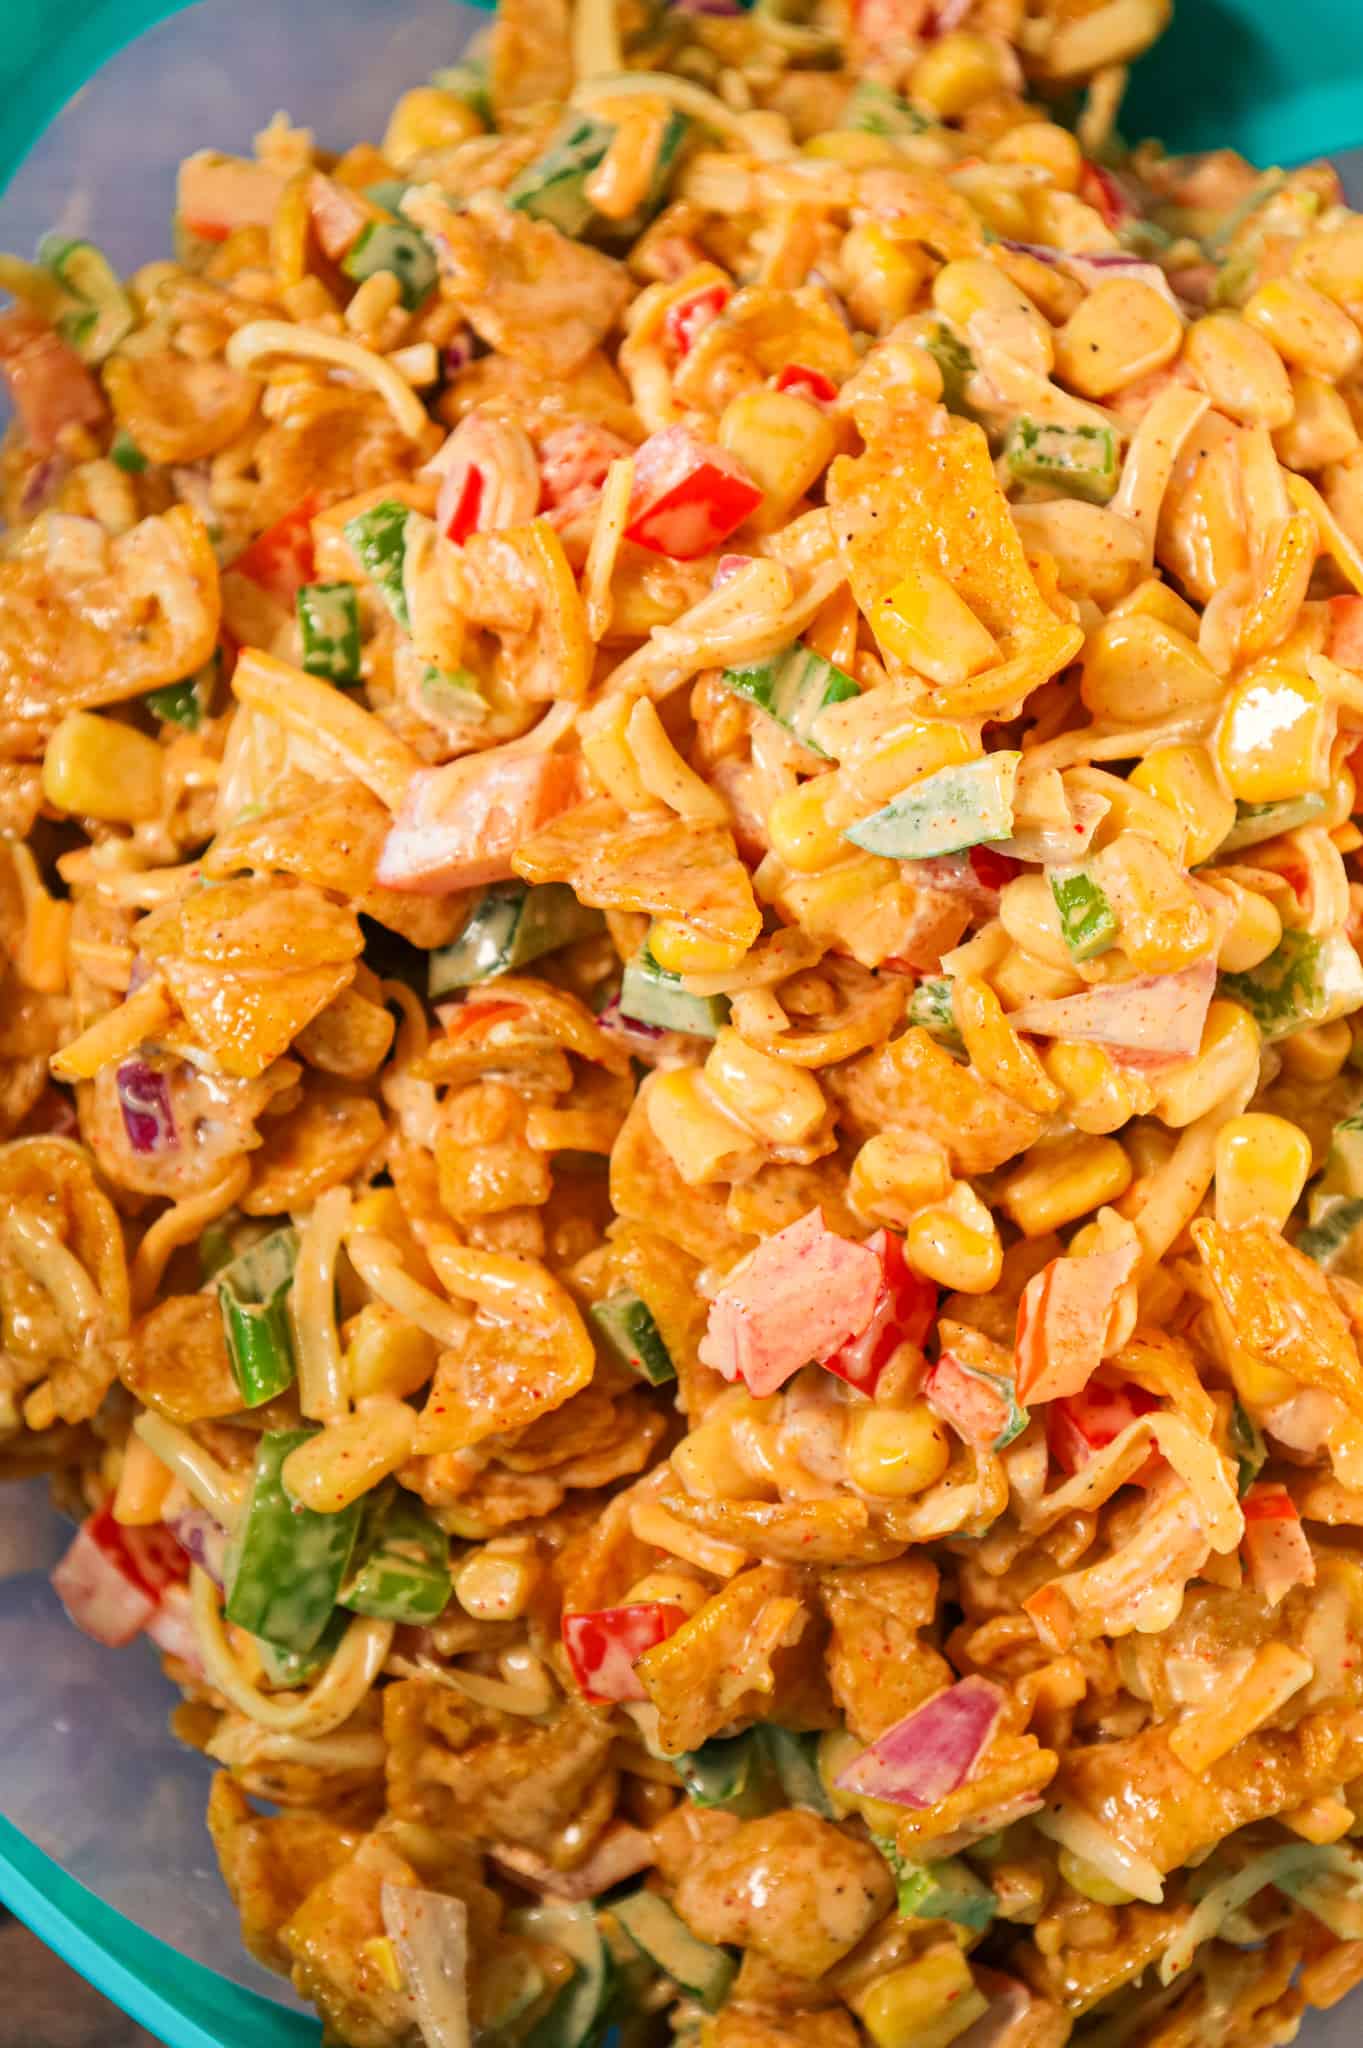 Frito Corn Salad is a delicious side dish recipe loaded with corn, diced bell peppers, onions, shredded cheese and corn chips all tossed in a creamy mixture of mayo, ranch dressing and taco seasoning.